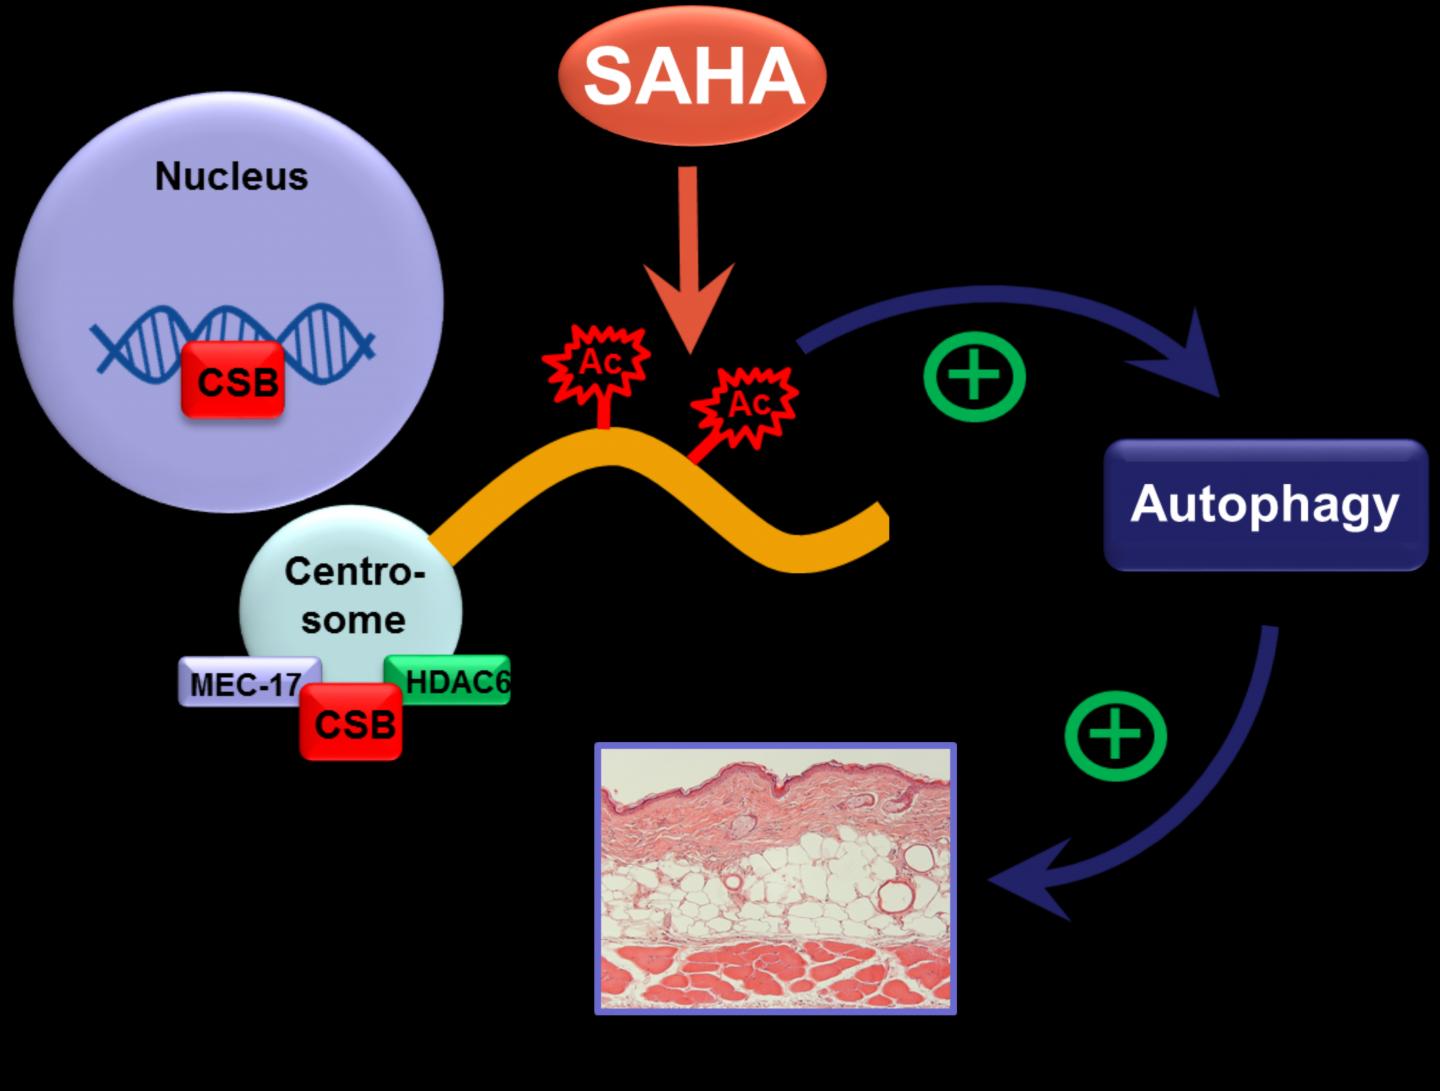 The HDAC Inhibitor SAHA Rescues the Skin Phenotype of CSB-deficient Mice